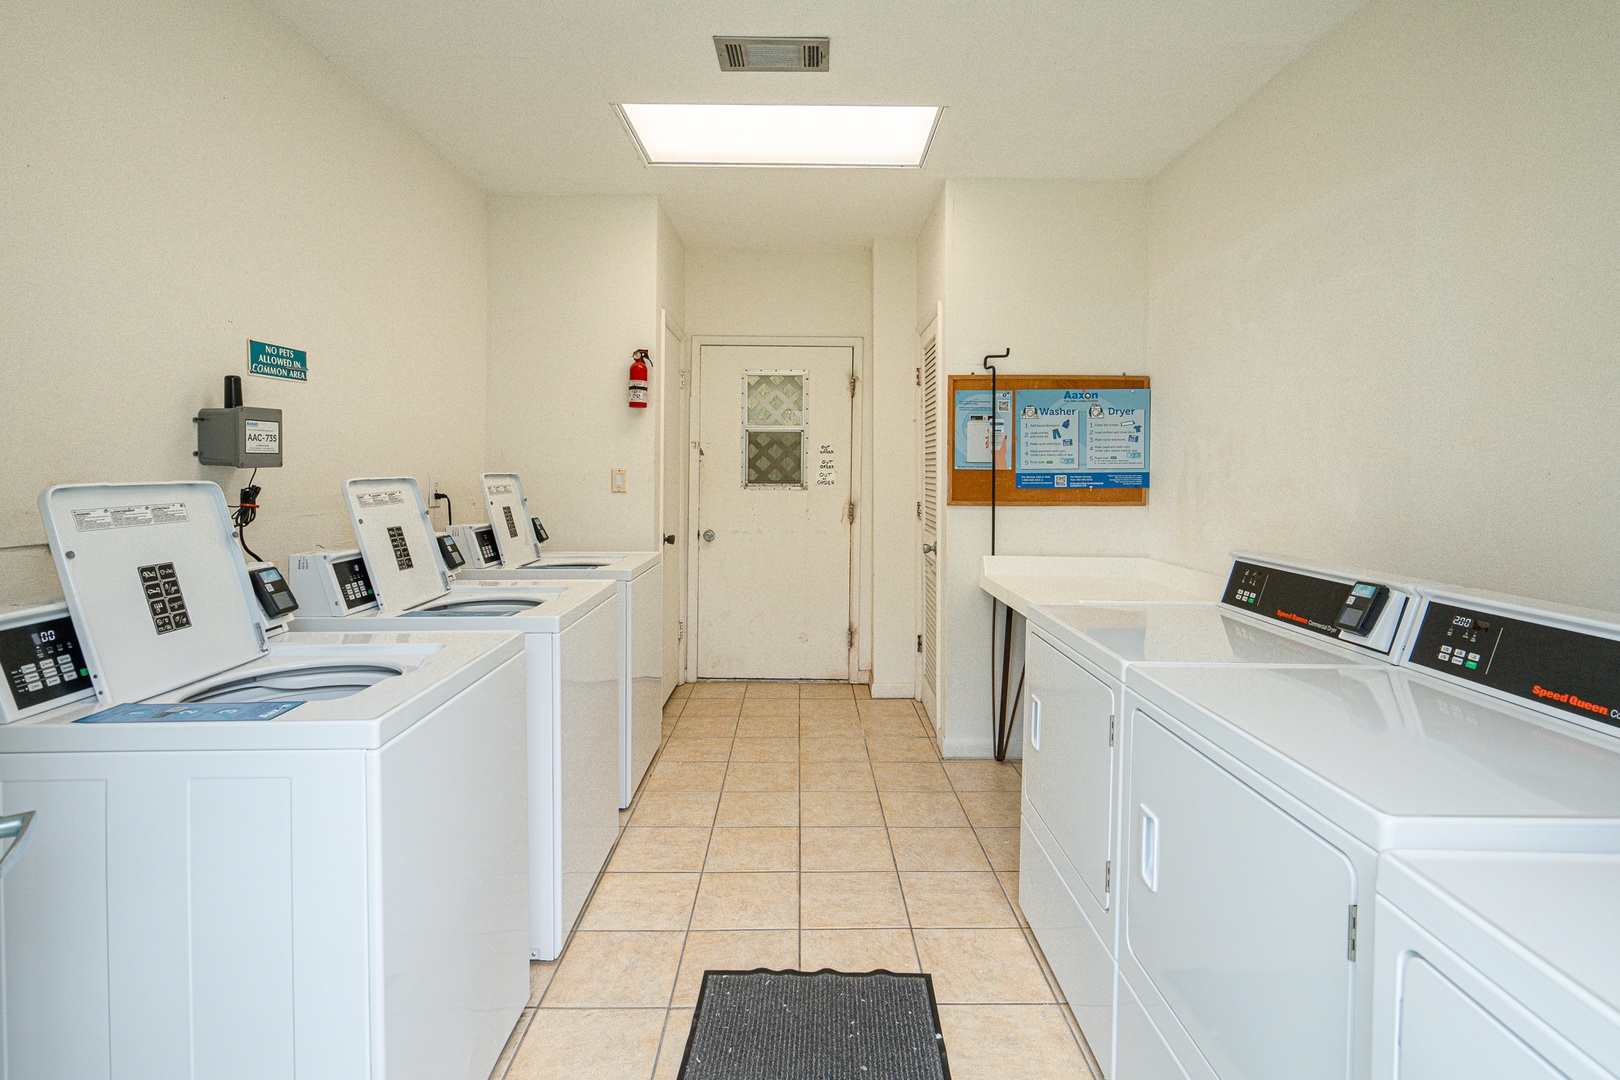 Communal laundry is available as needed for your visit